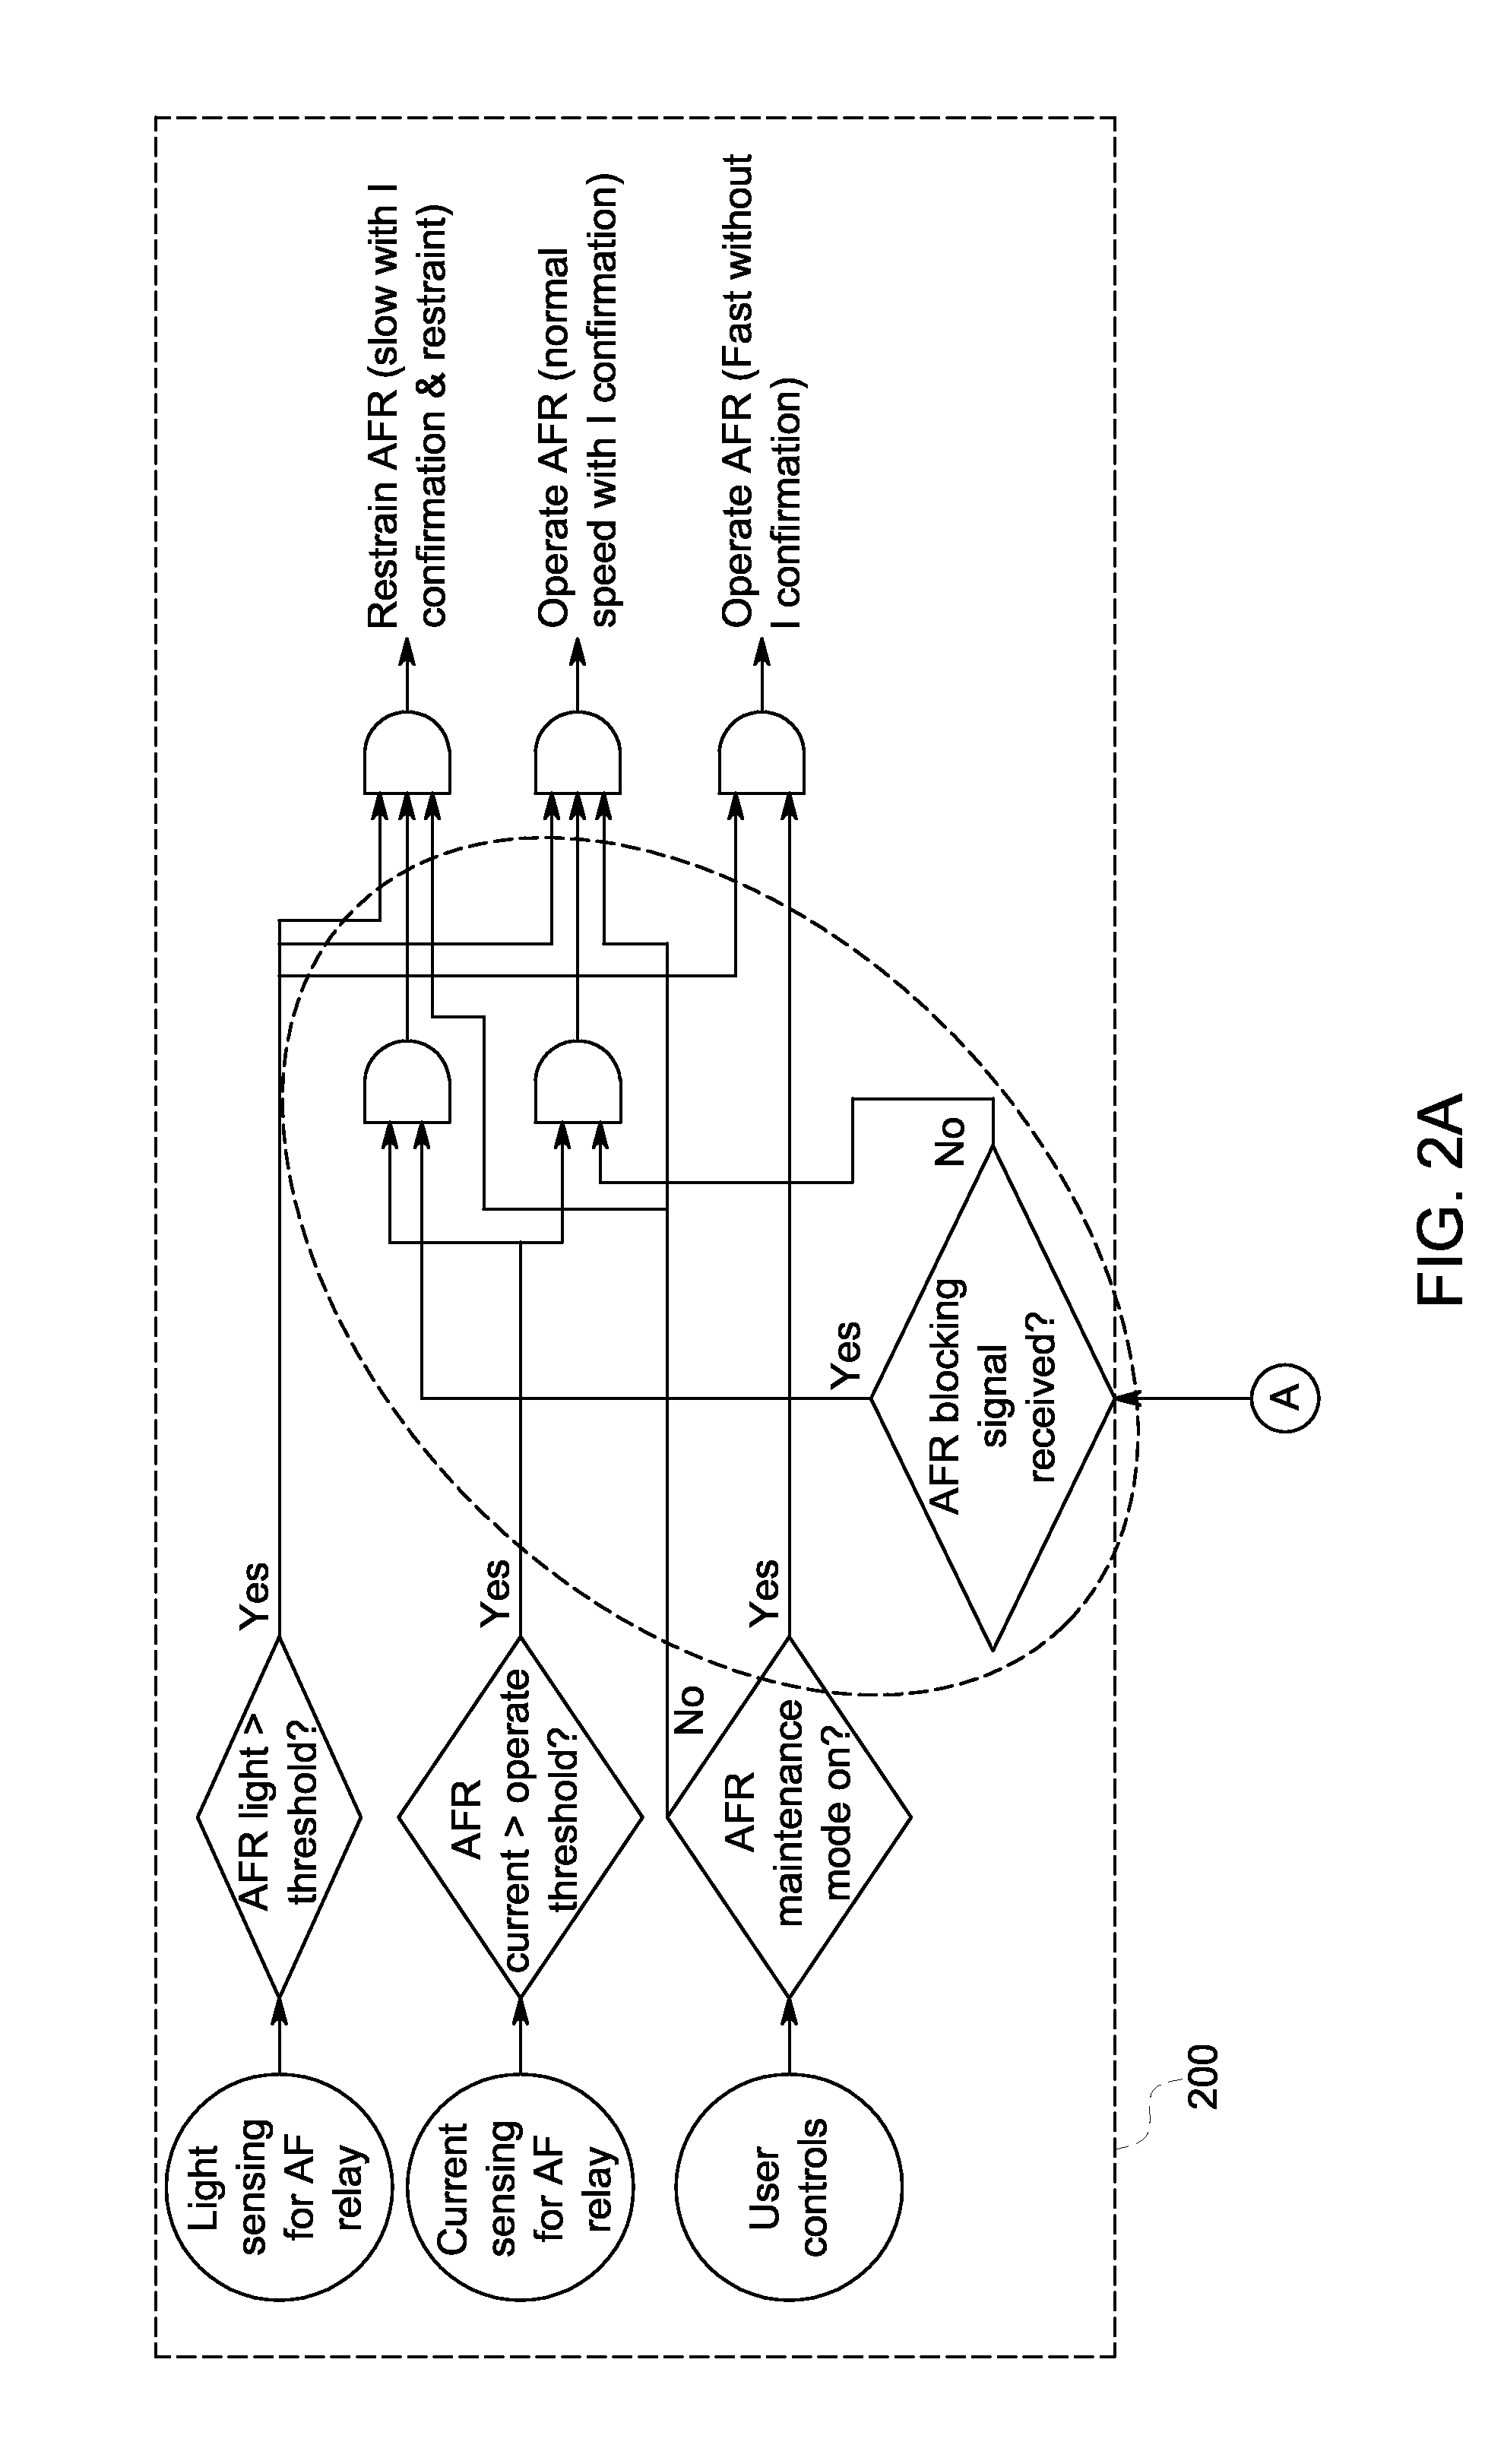 Power distribution systems and methods of operating a power distribution system including arc flash detection